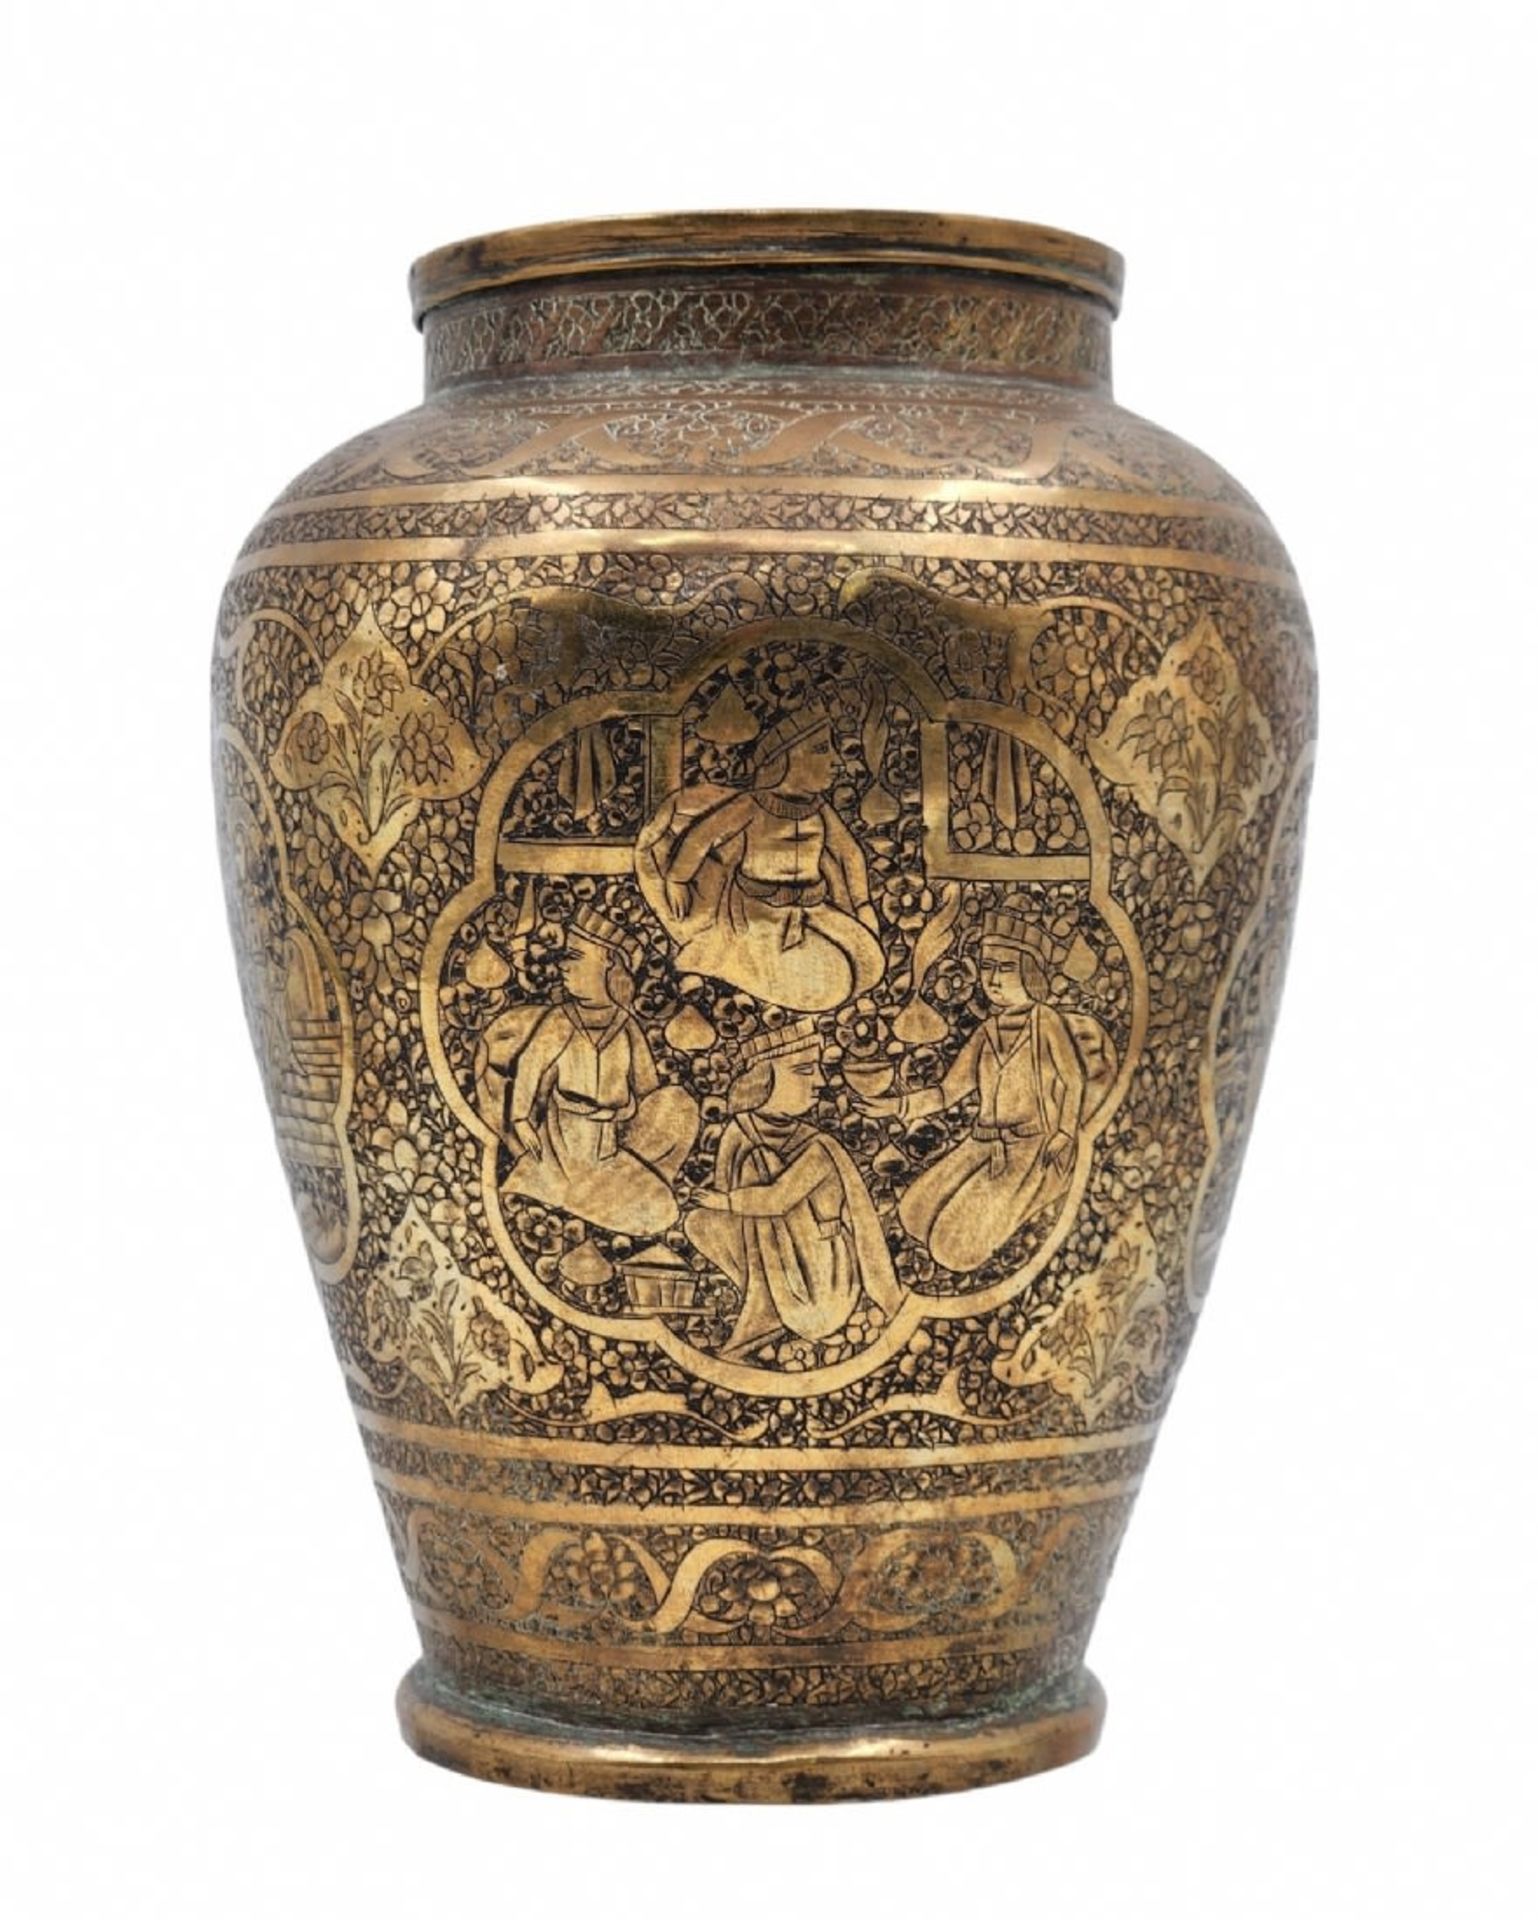 An antique Persian Hindu Urn, beautiful and especially high-quality 19th century urn, made of brass,